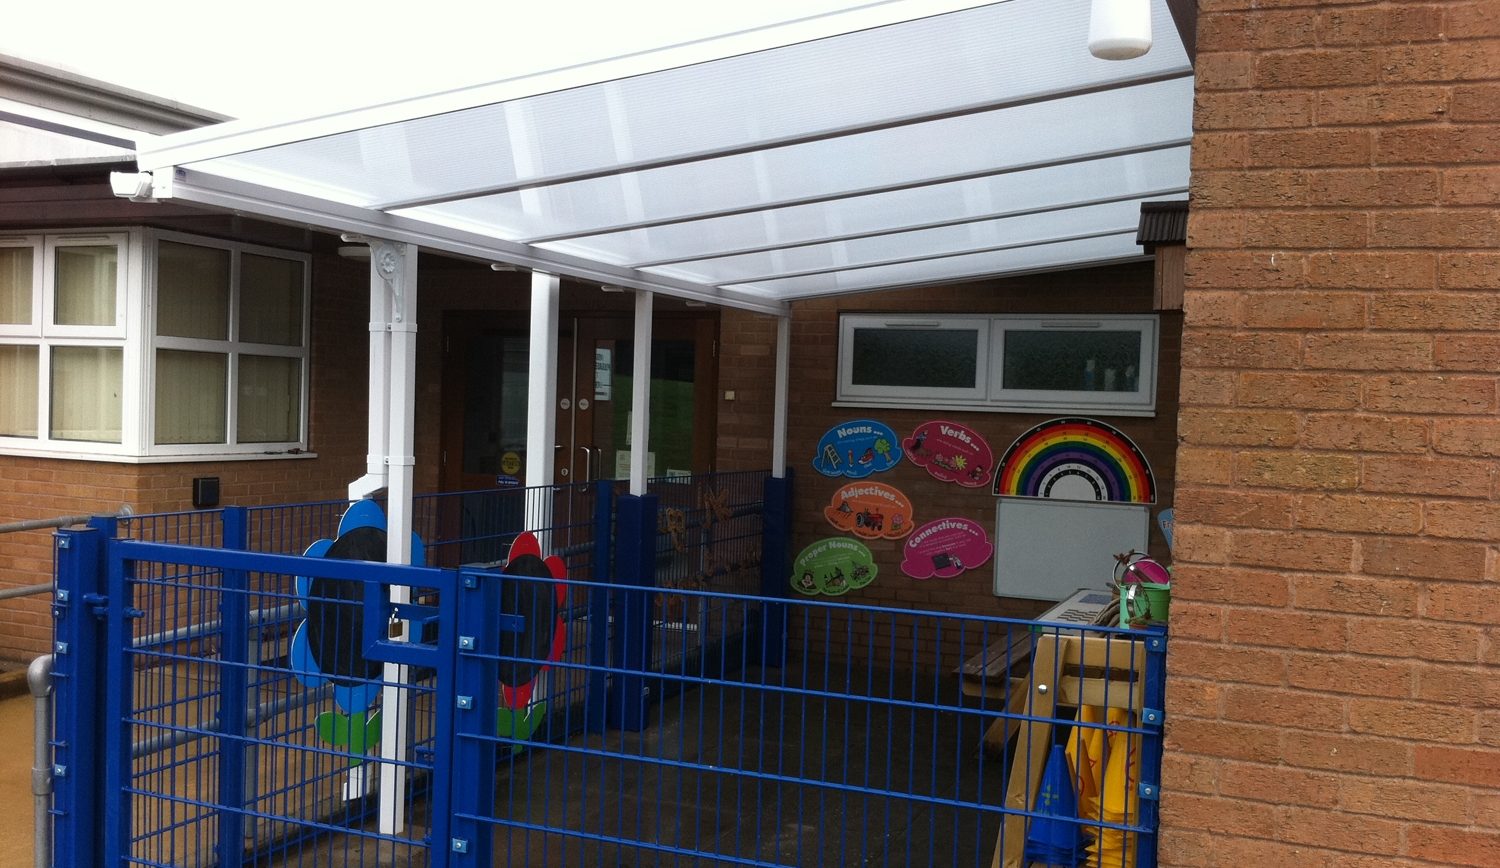 St Anne’s C of E Primary School – Wall Mounted Canopy – 2nd Installation